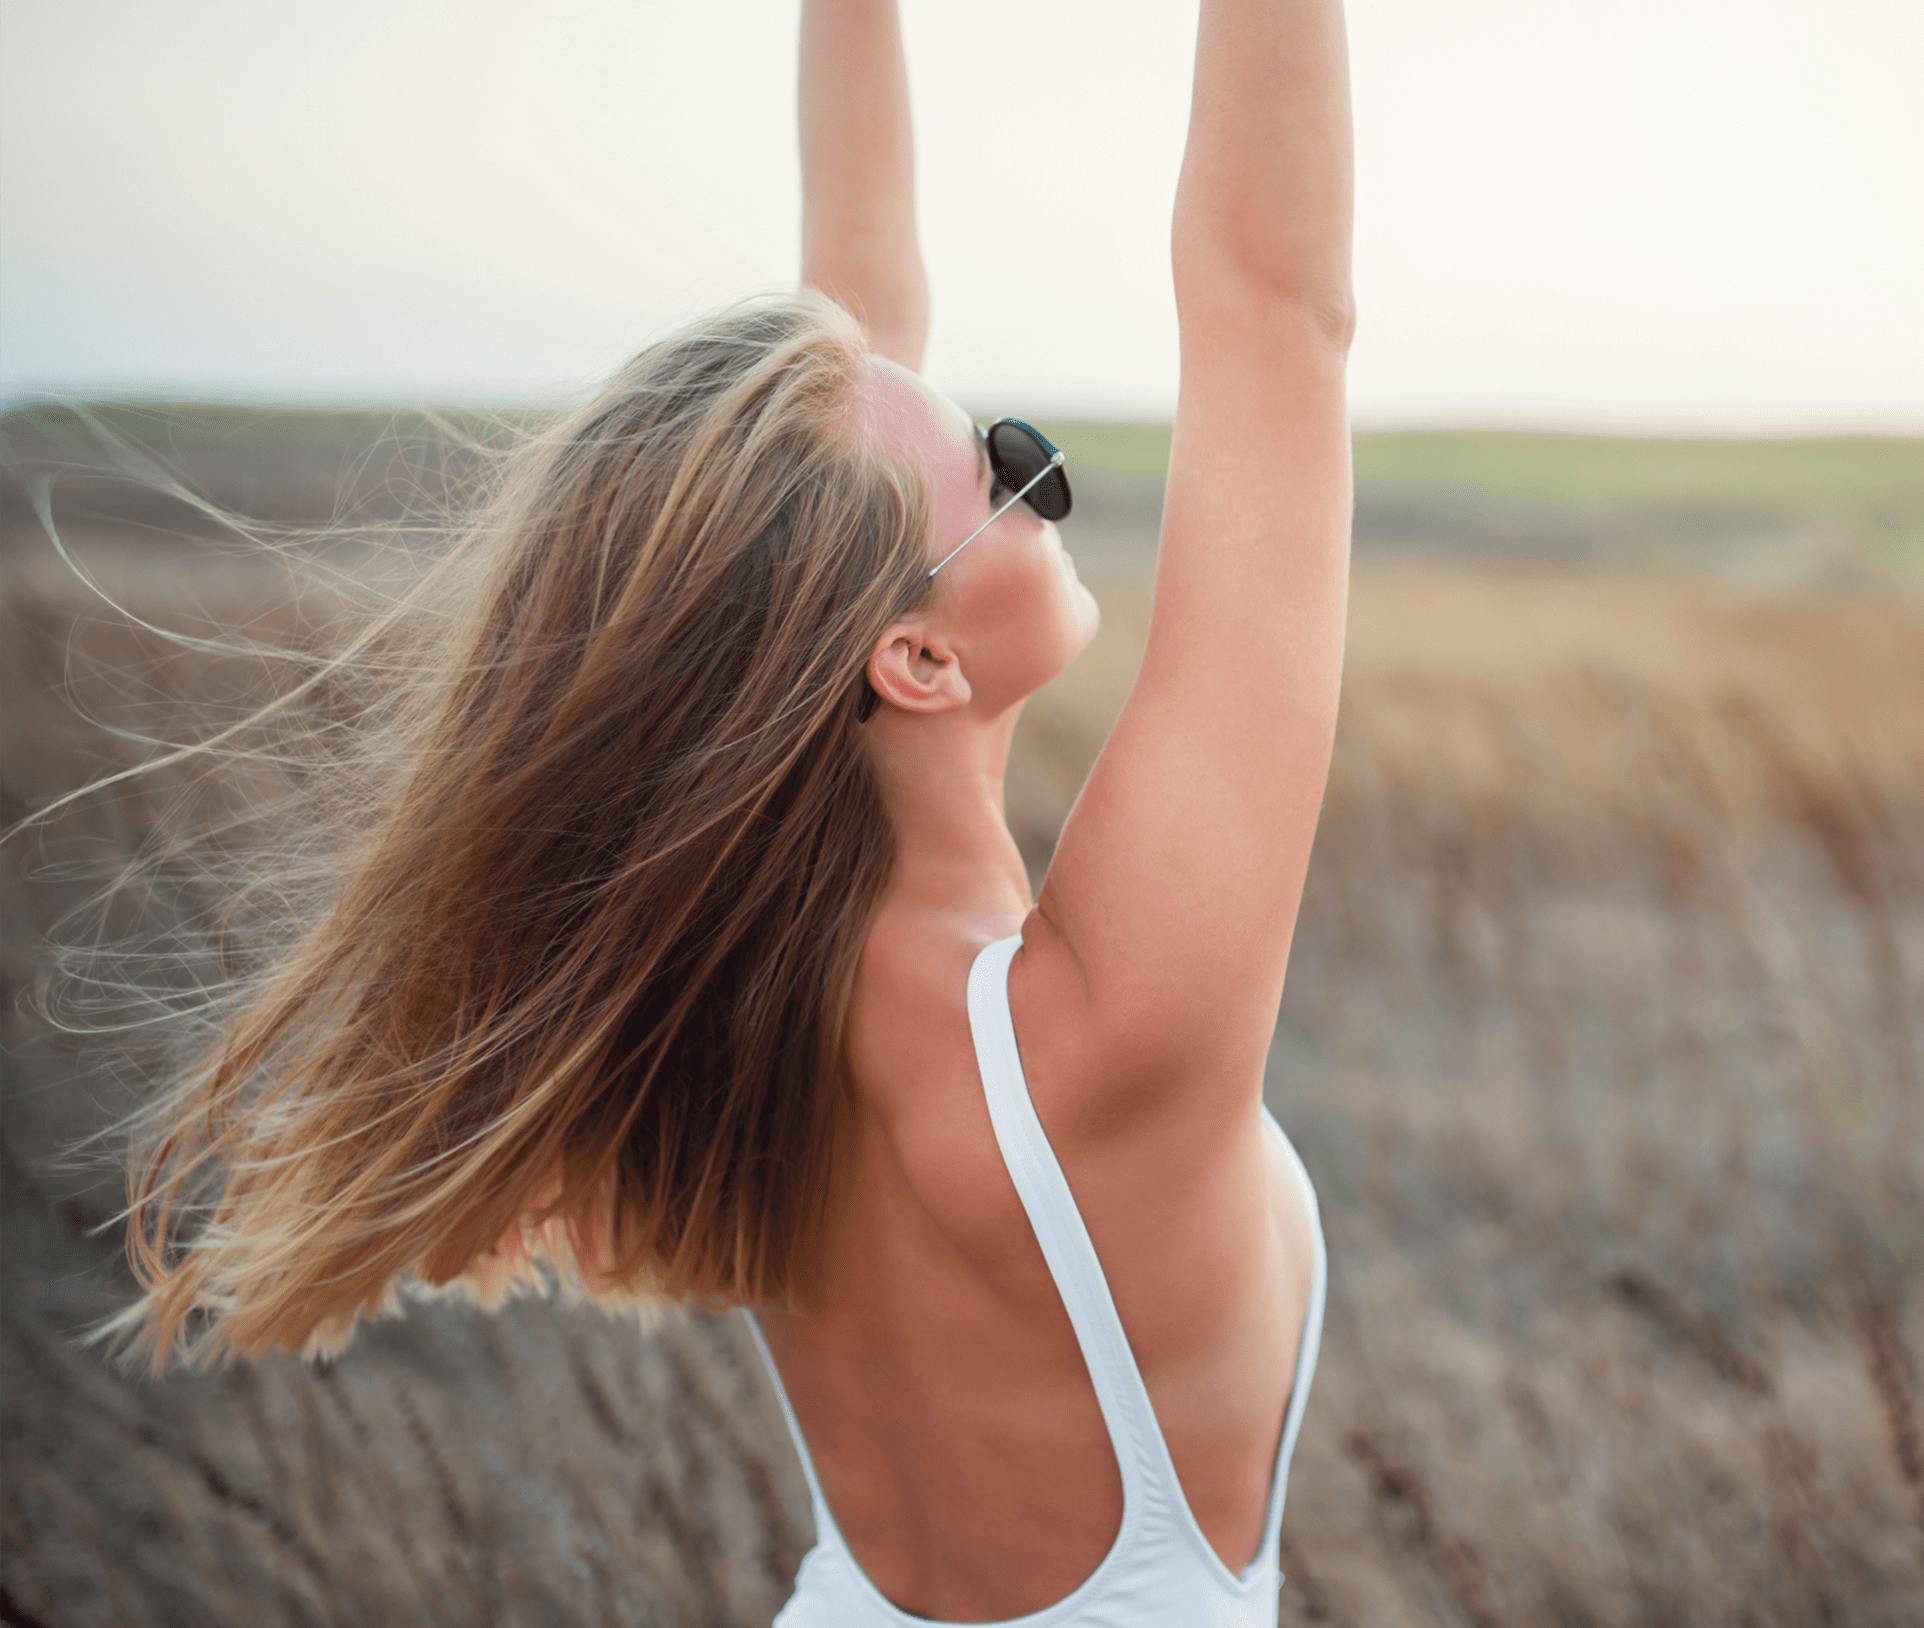 woman holding her arms up, hair blowing in the wind